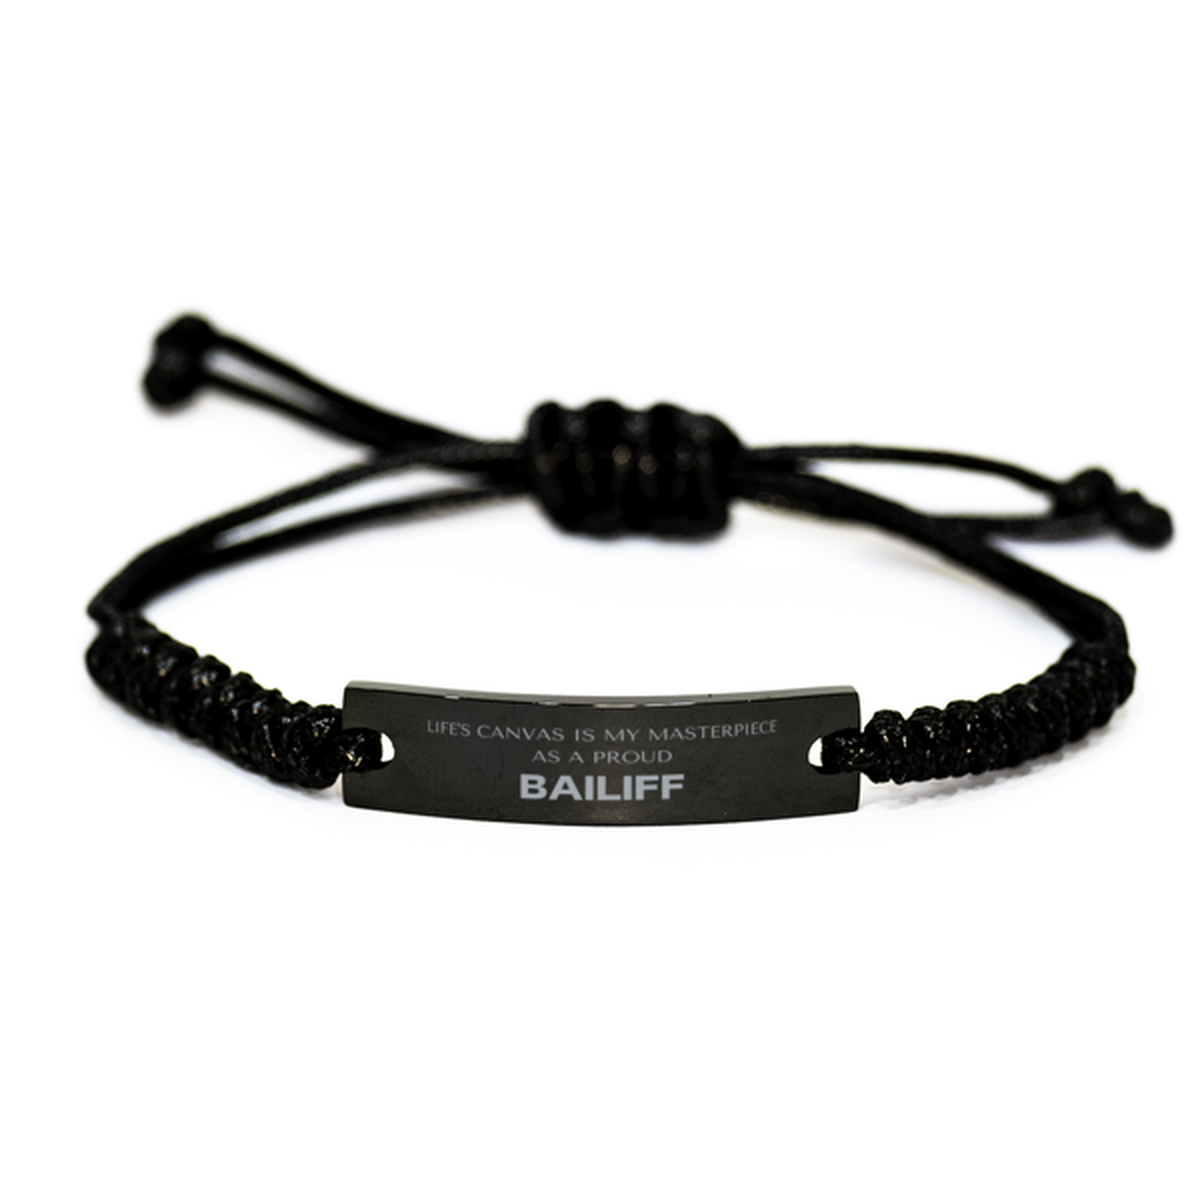 Proud Bailiff Gifts, Life's canvas is my masterpiece, Epic Birthday Christmas Unique Black Rope Bracelet For Bailiff, Coworkers, Men, Women, Friends